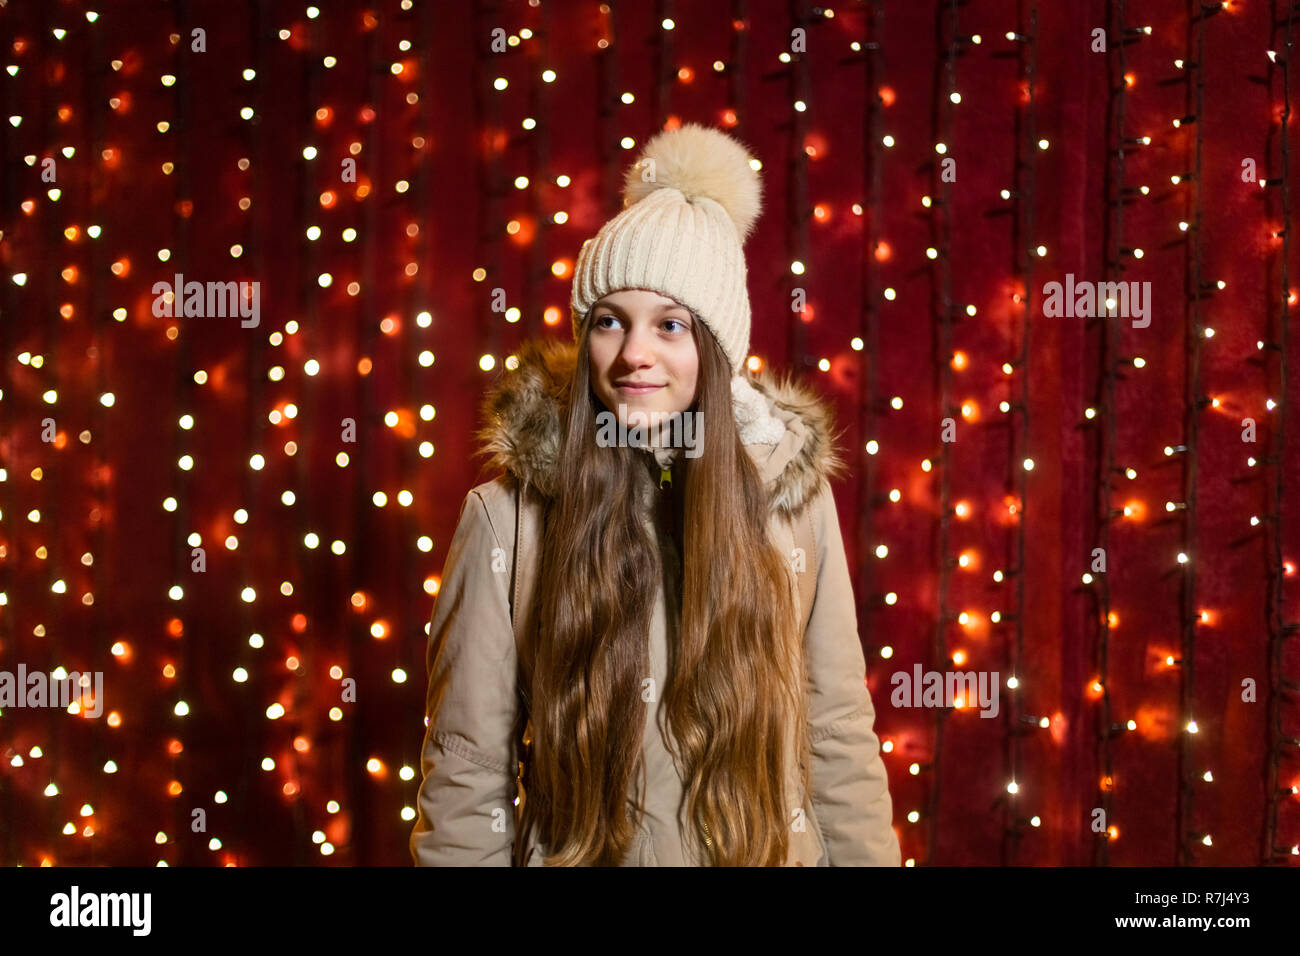 Teenager with long hair posing in front of lights wall at Christmas market. Stock Photo